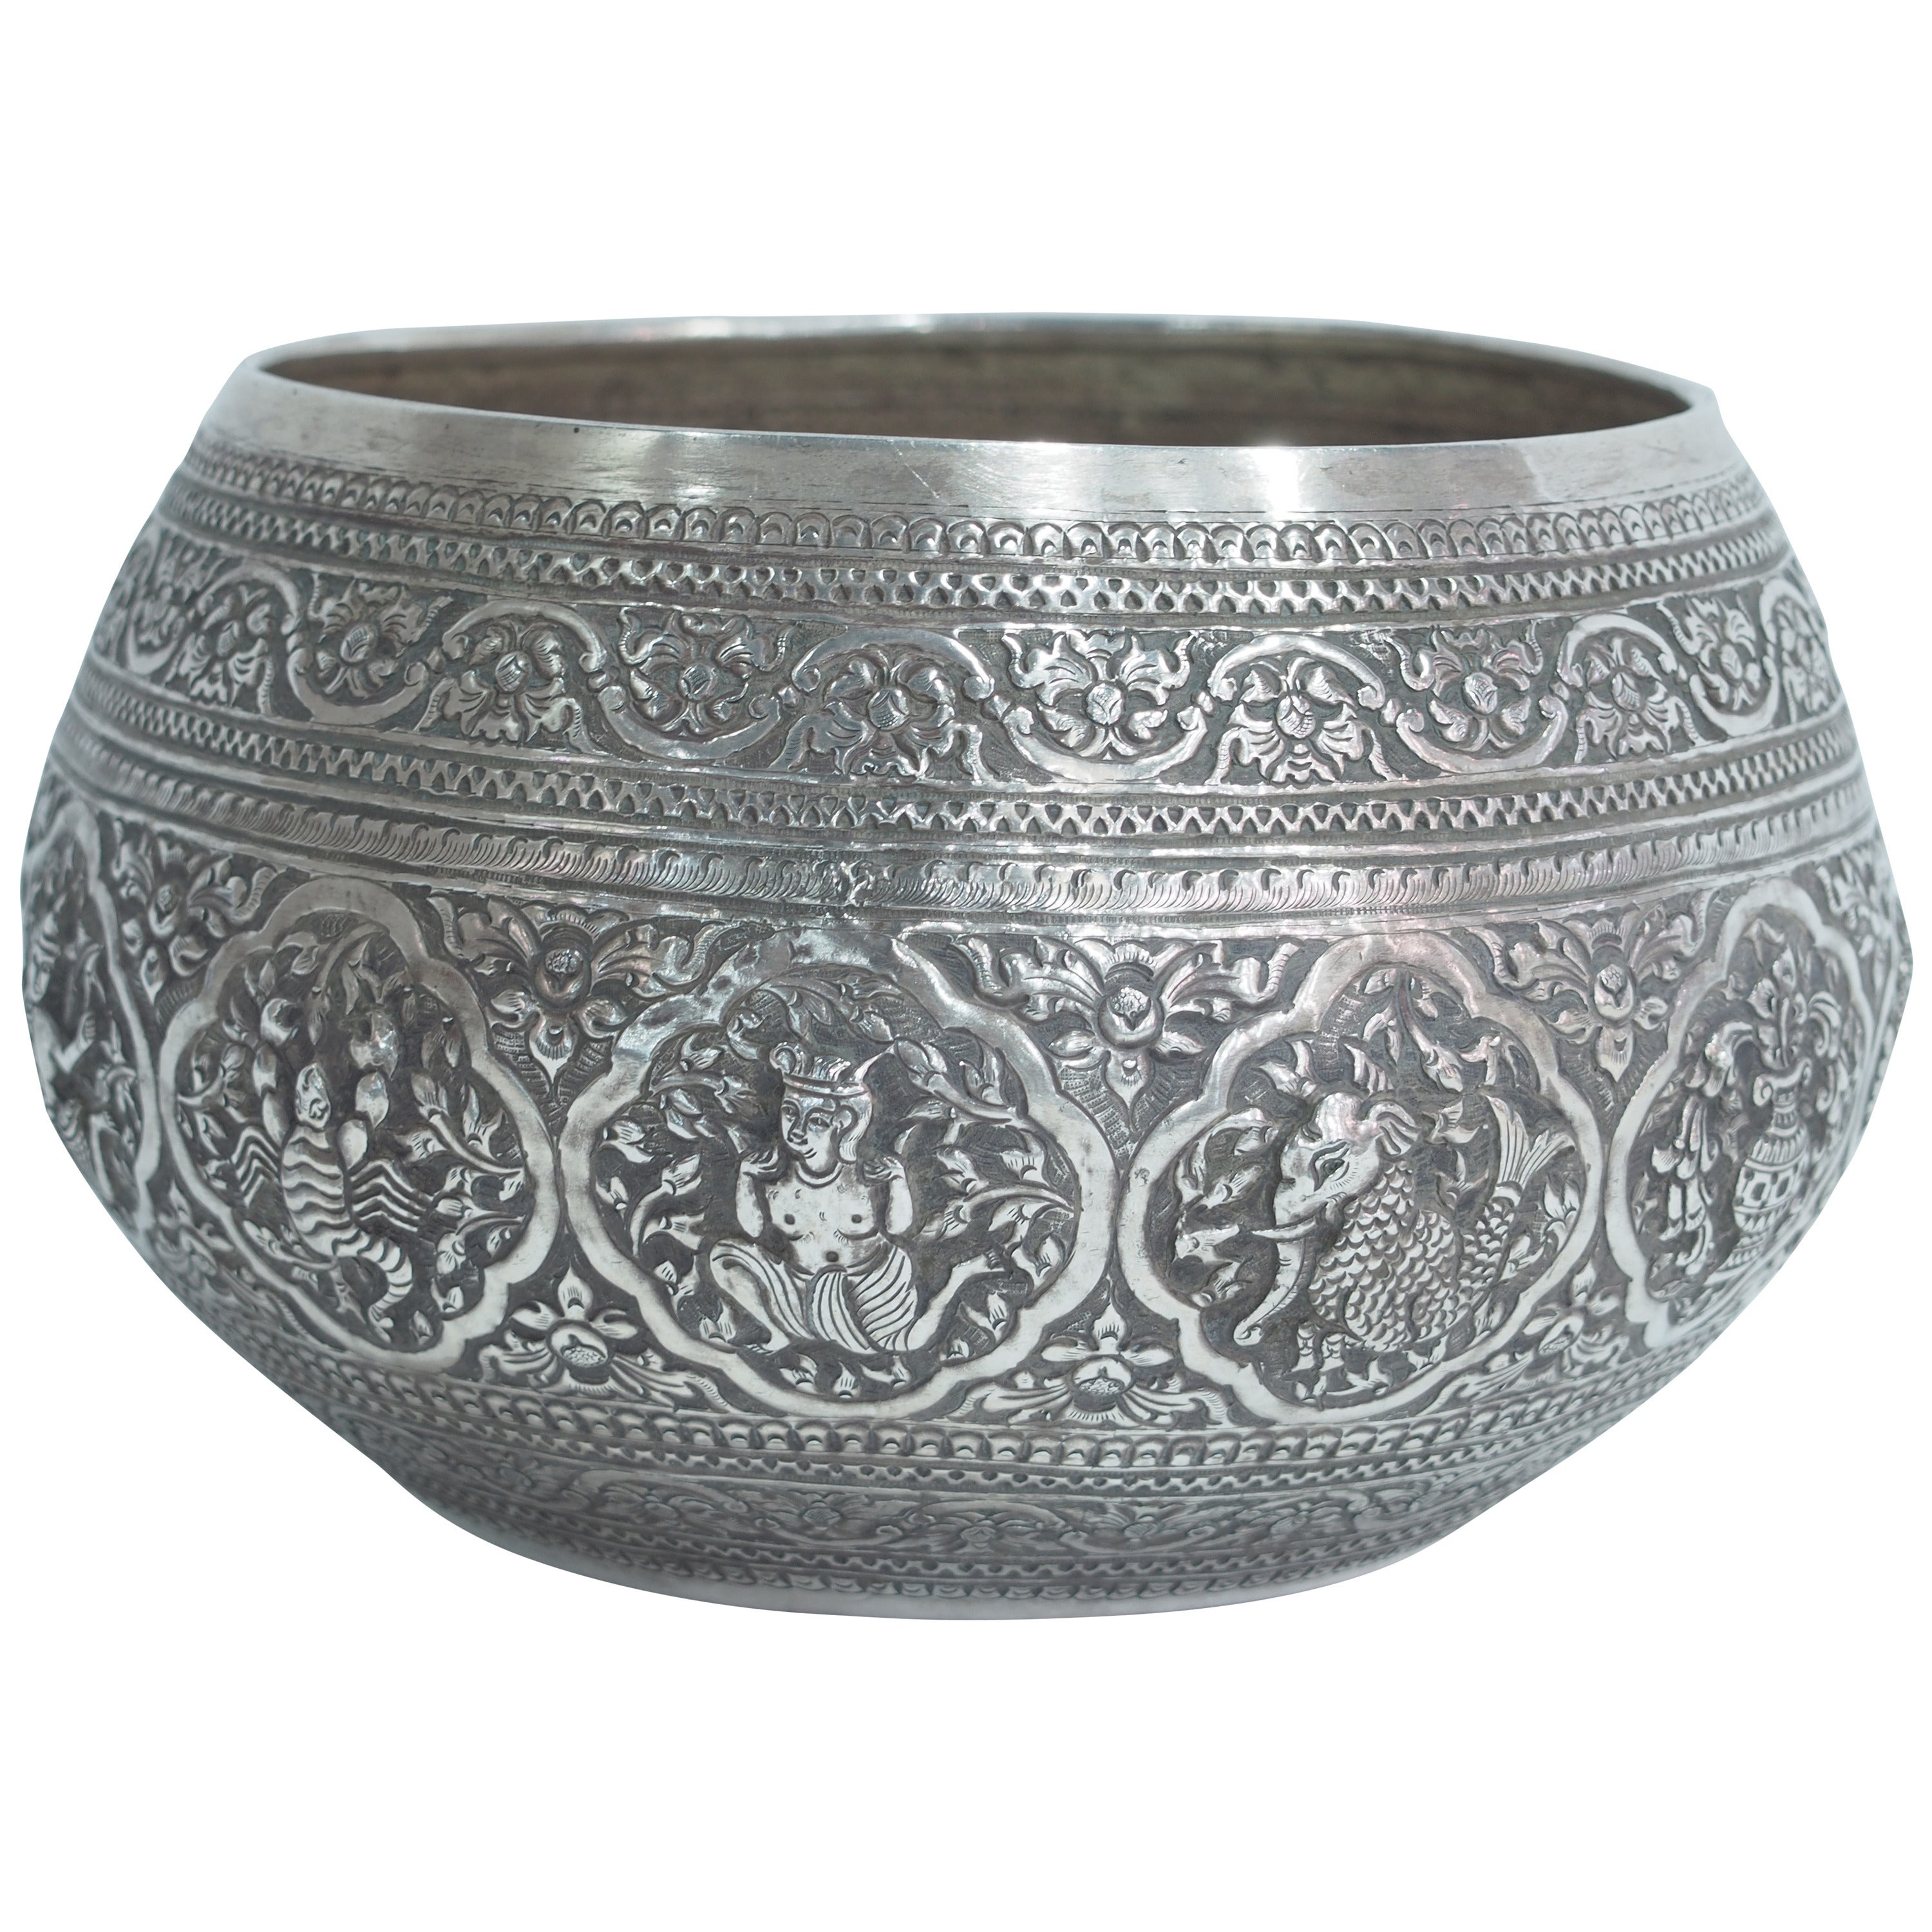 Old Hand-Worked Solid Silver Burmese Ceremonial Zodiac Bowl